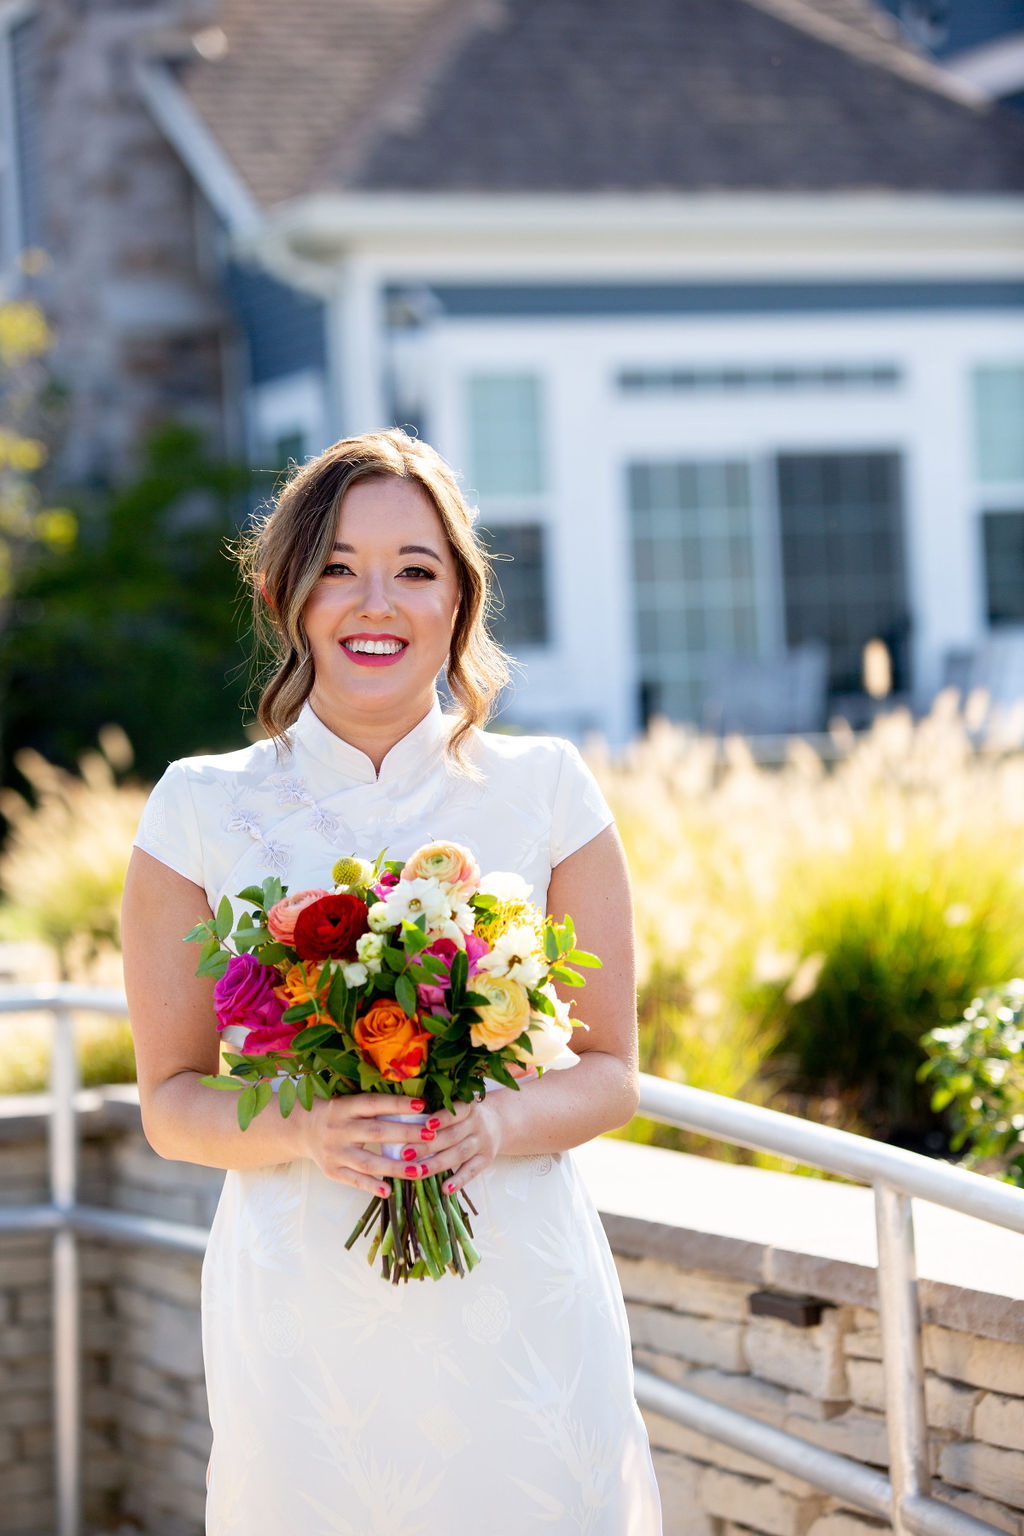 Embracing Vibrance: Top 10 Colorful Wedding Bouquets That Make a Statement, Kate Fine Art Photography